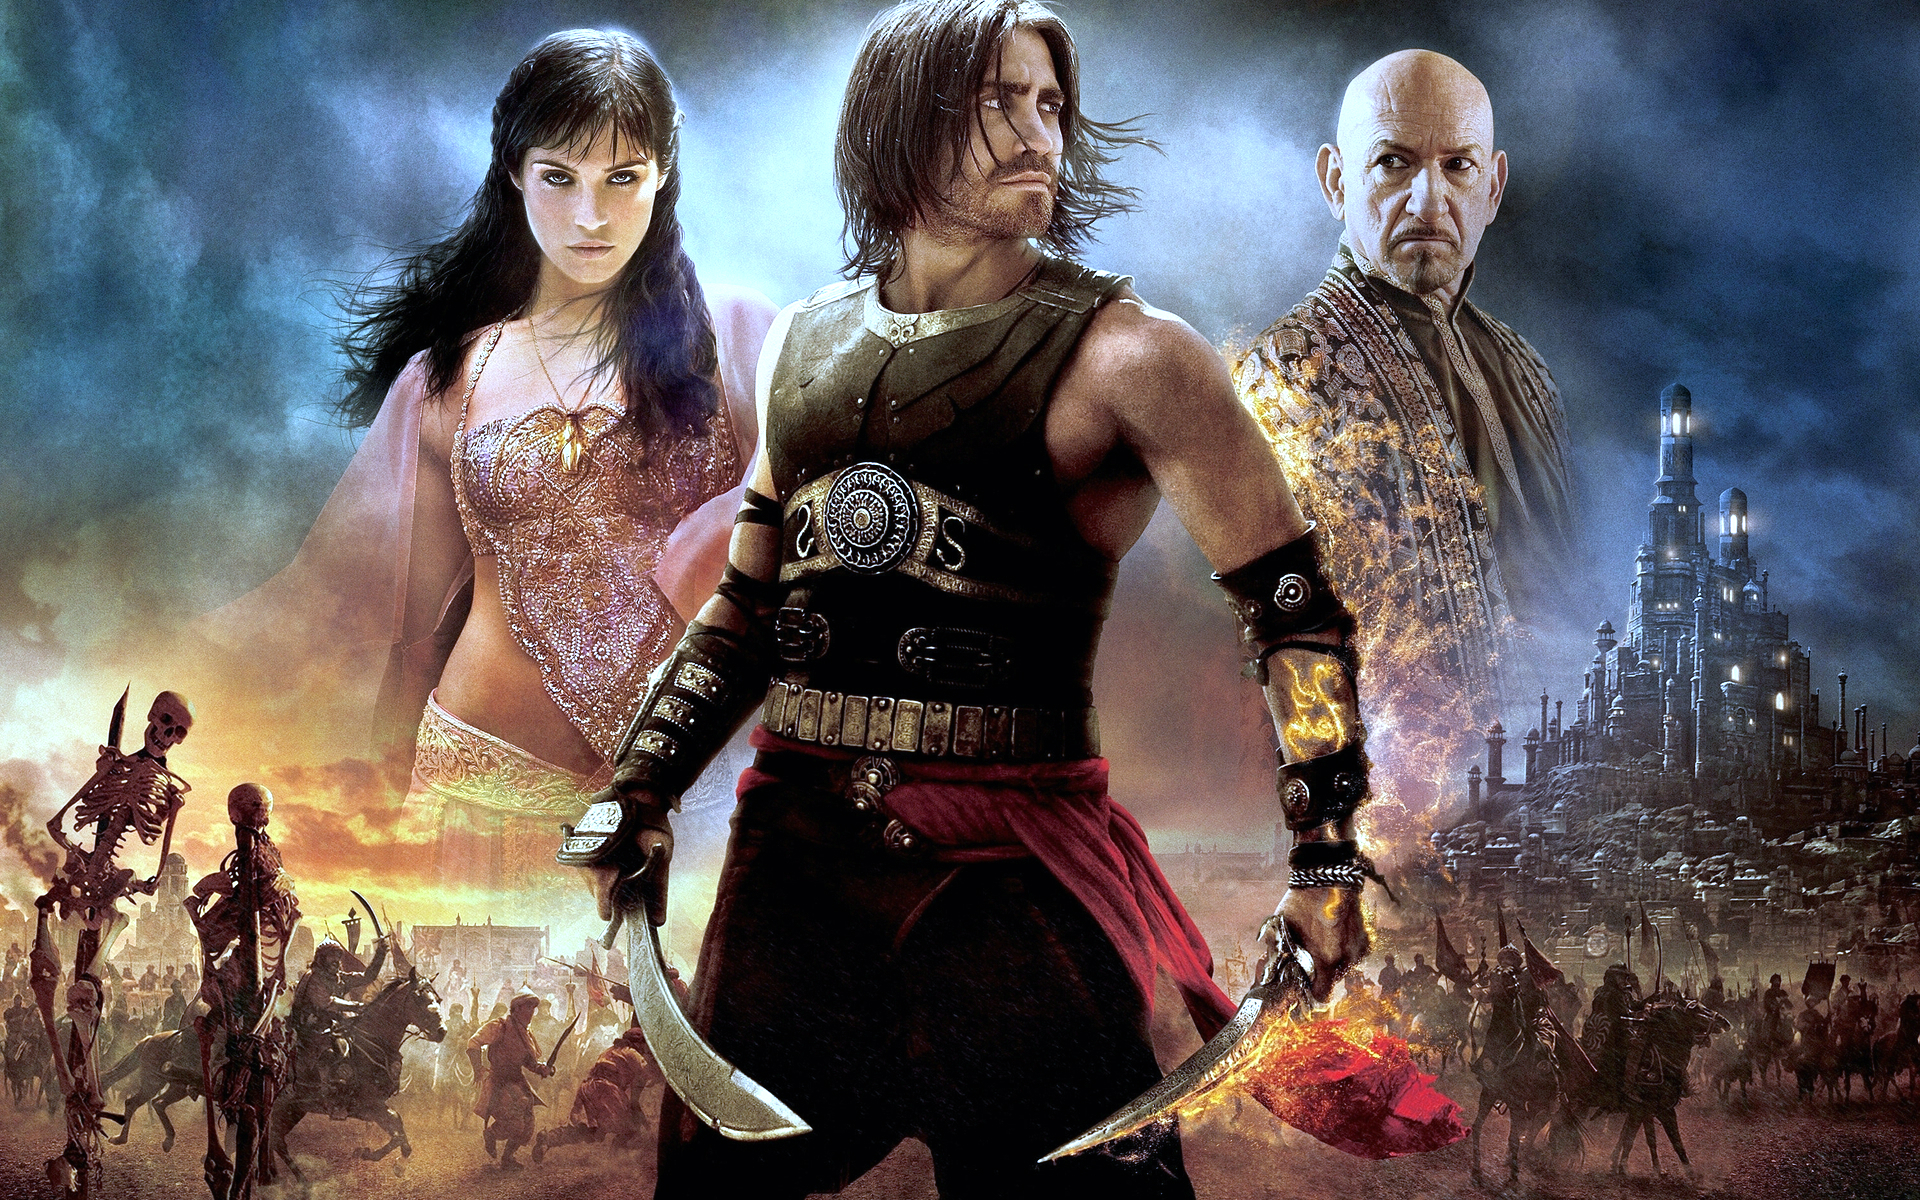 Prince Of Persia Wallpaper The Sands Of Time Jake-gyllenhaal - Prince Of Persia  Wallpapers Movie - 1920x1200 Wallpaper 